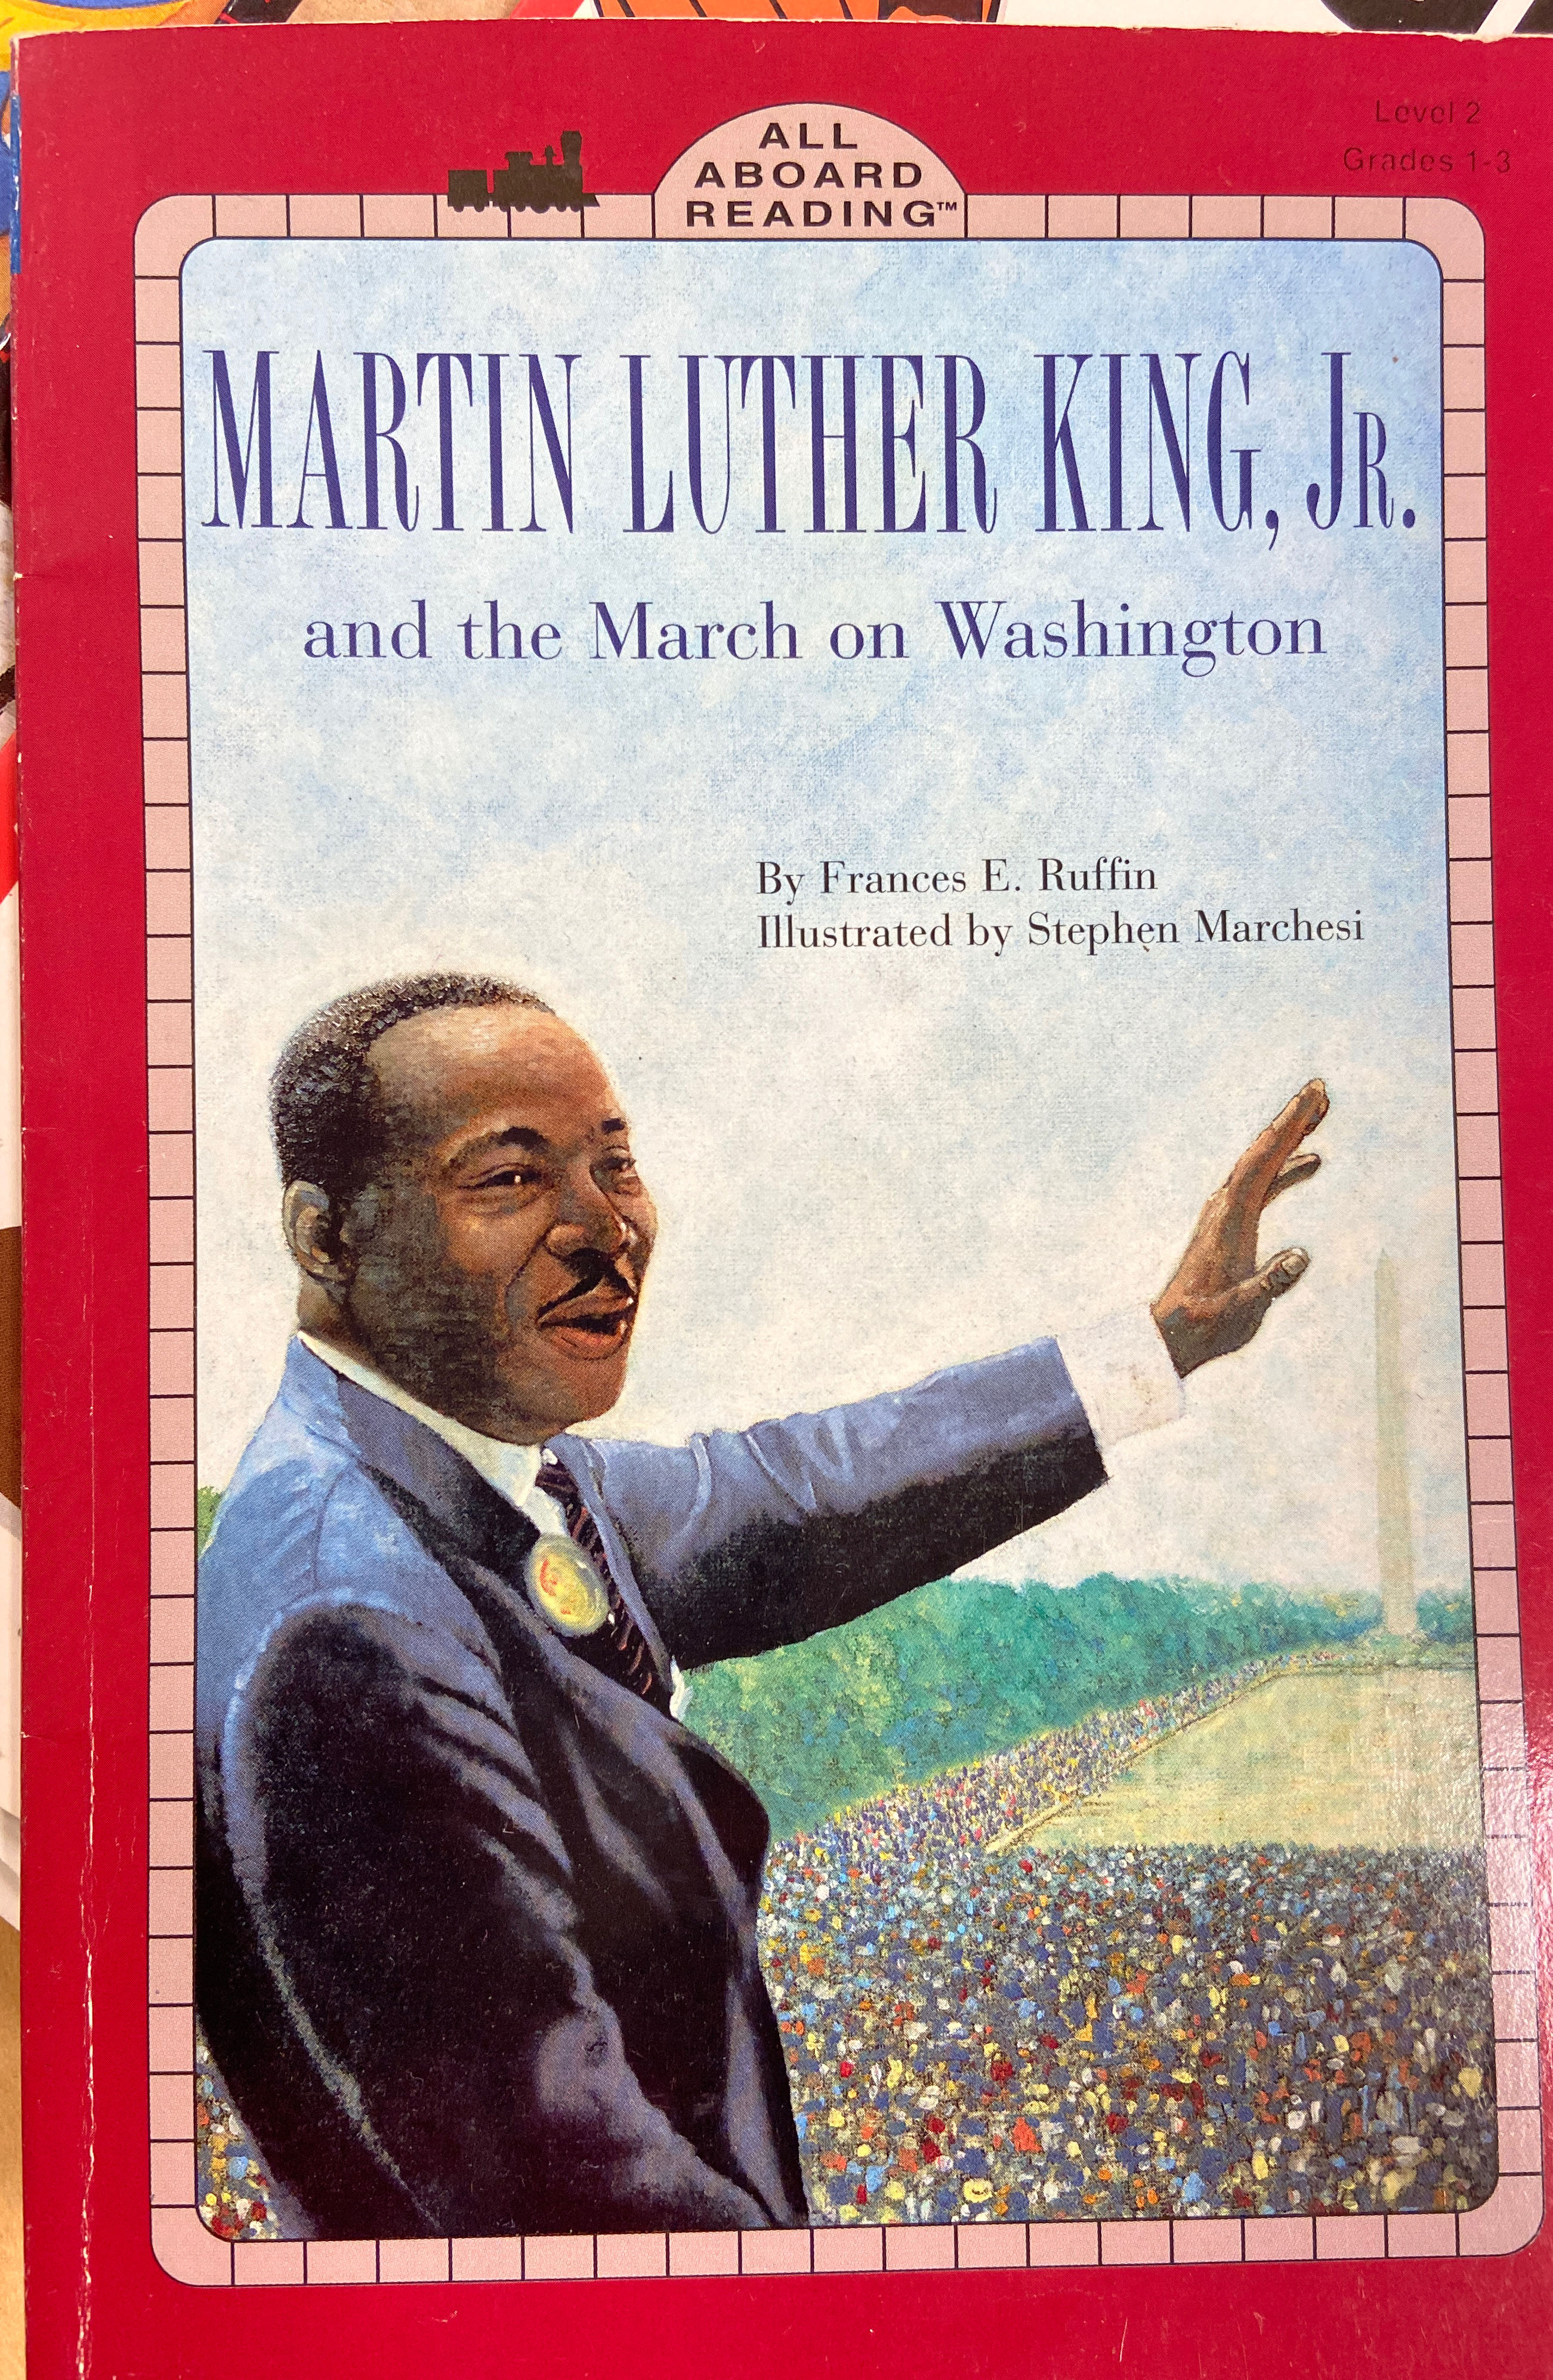 Martin Luther King, Jr. and the March on Washington - Frances E. Ruffin (Addison Wesley Publishing Company - Paperback) book collectible [Barcode 9780448424217] - Main Image 3